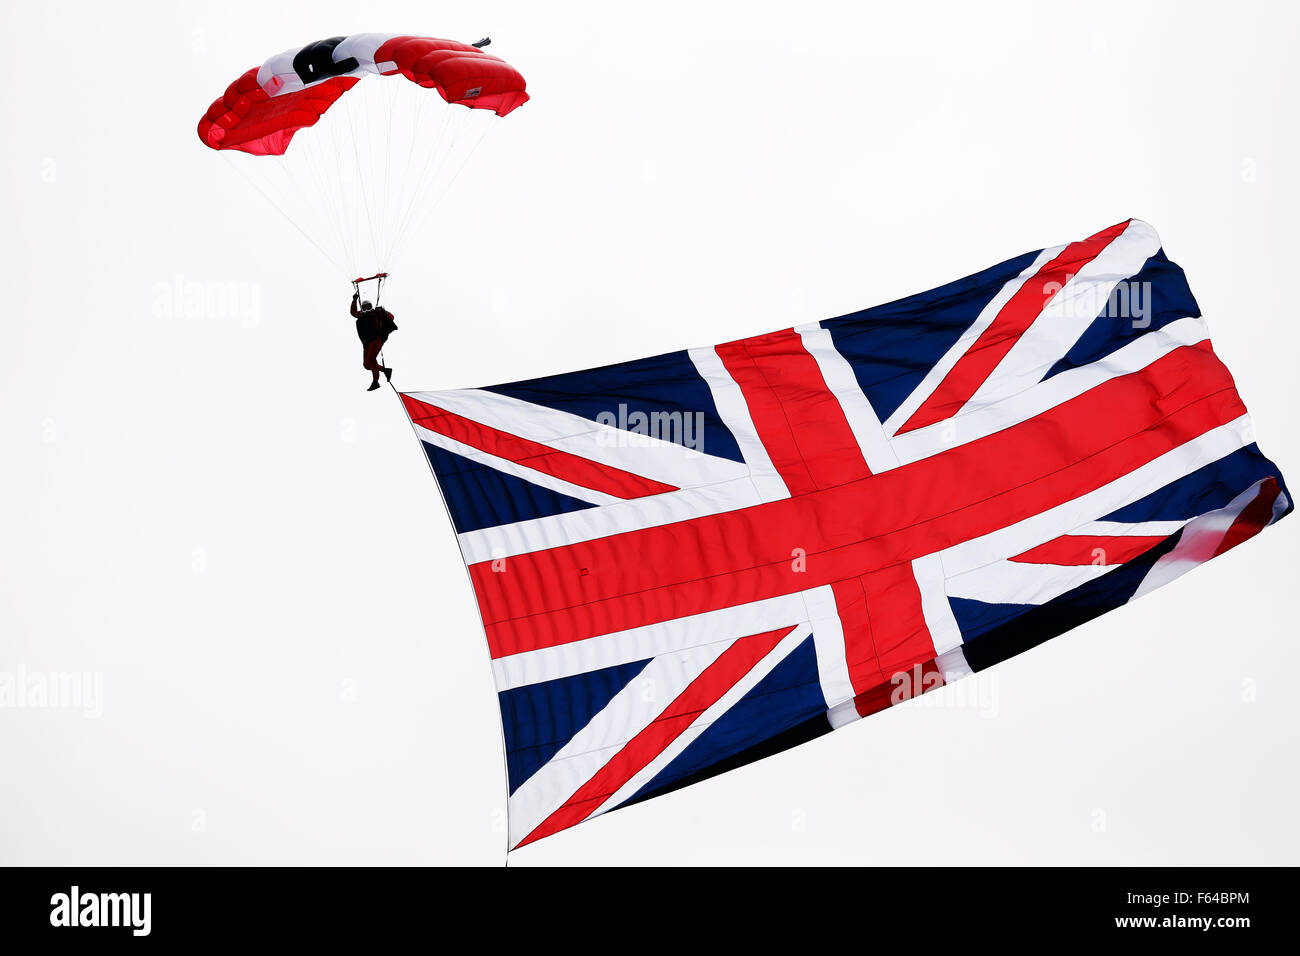 The Red Devils - the freefall team is the parachute display team of both The Parachute Regiment and The British Army Stock Photo